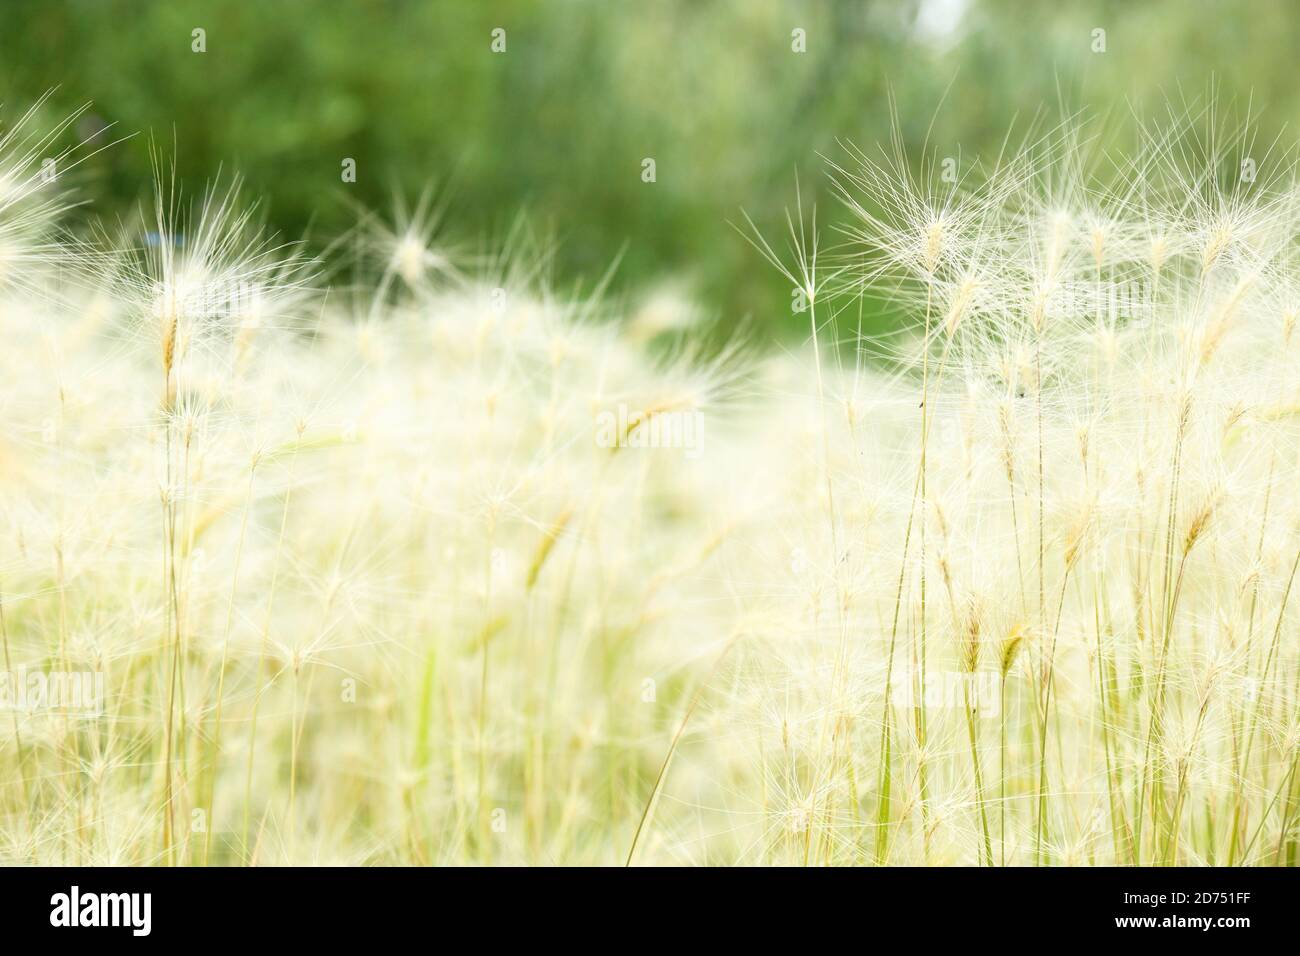 fuzzy and soft looking reed on a hot summer day Stock Photo